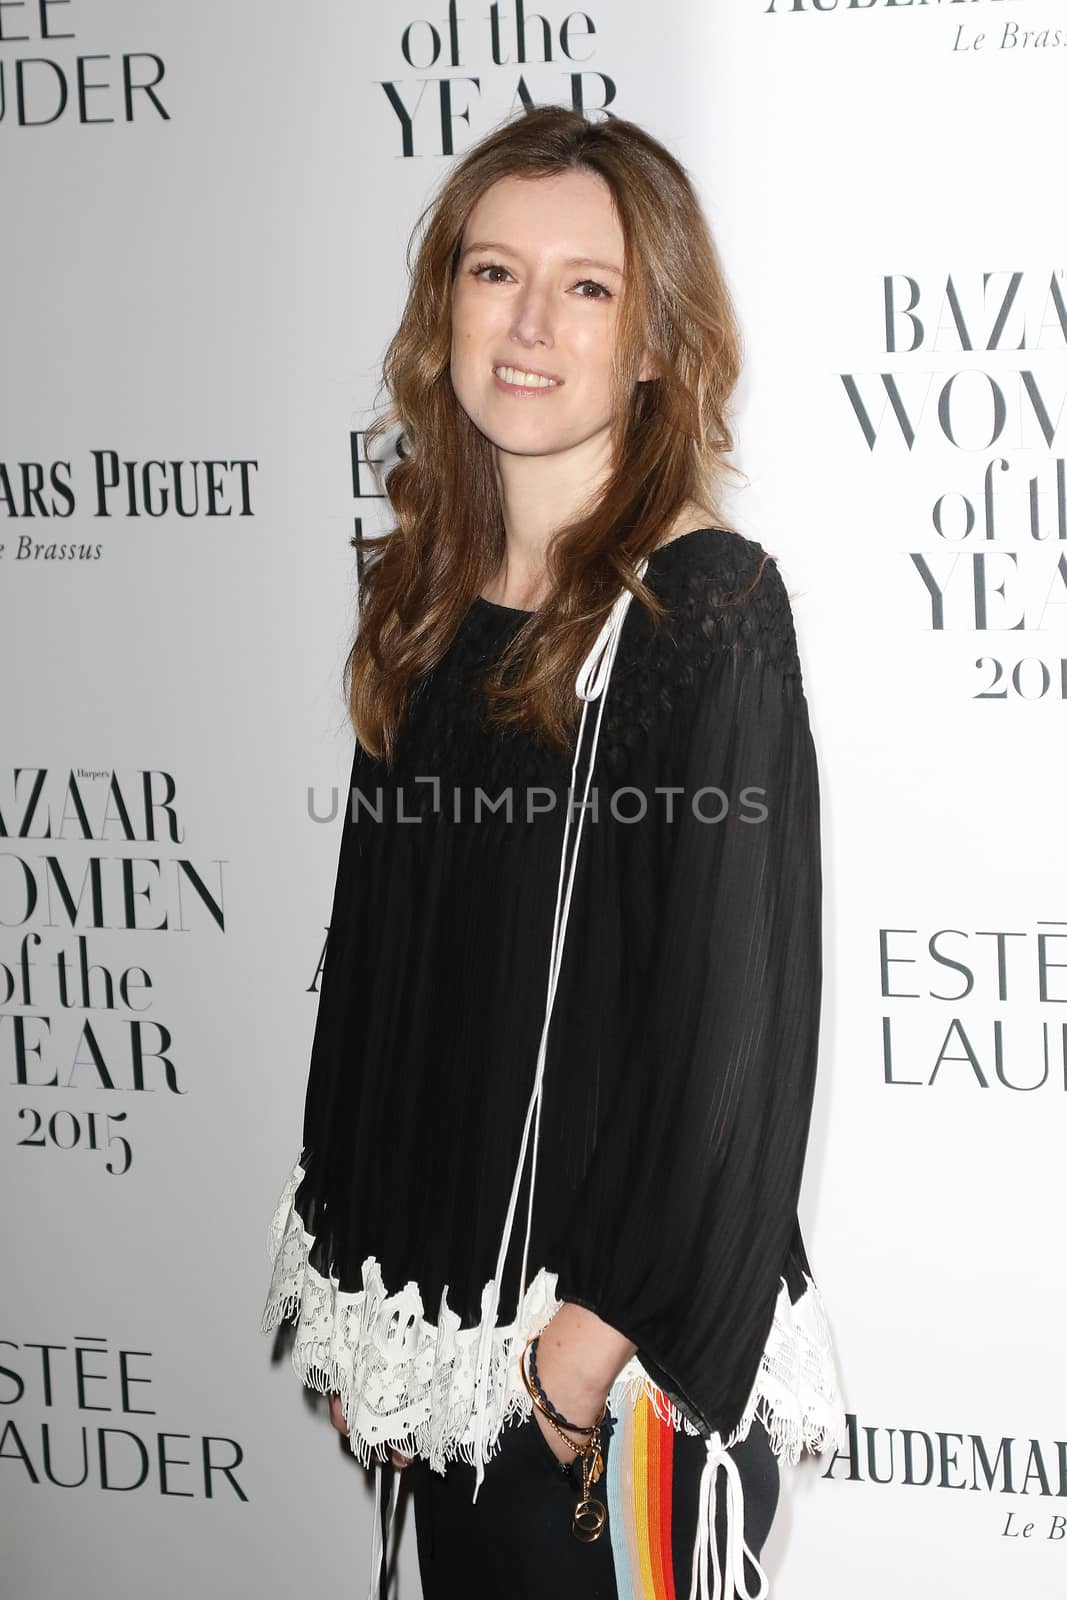 UNITED KINGDOM, London: Clare Waight Keller poses during the Harper's Bazaar Women of the Year Awards at Claridge's, in London, on November 3, 2015.